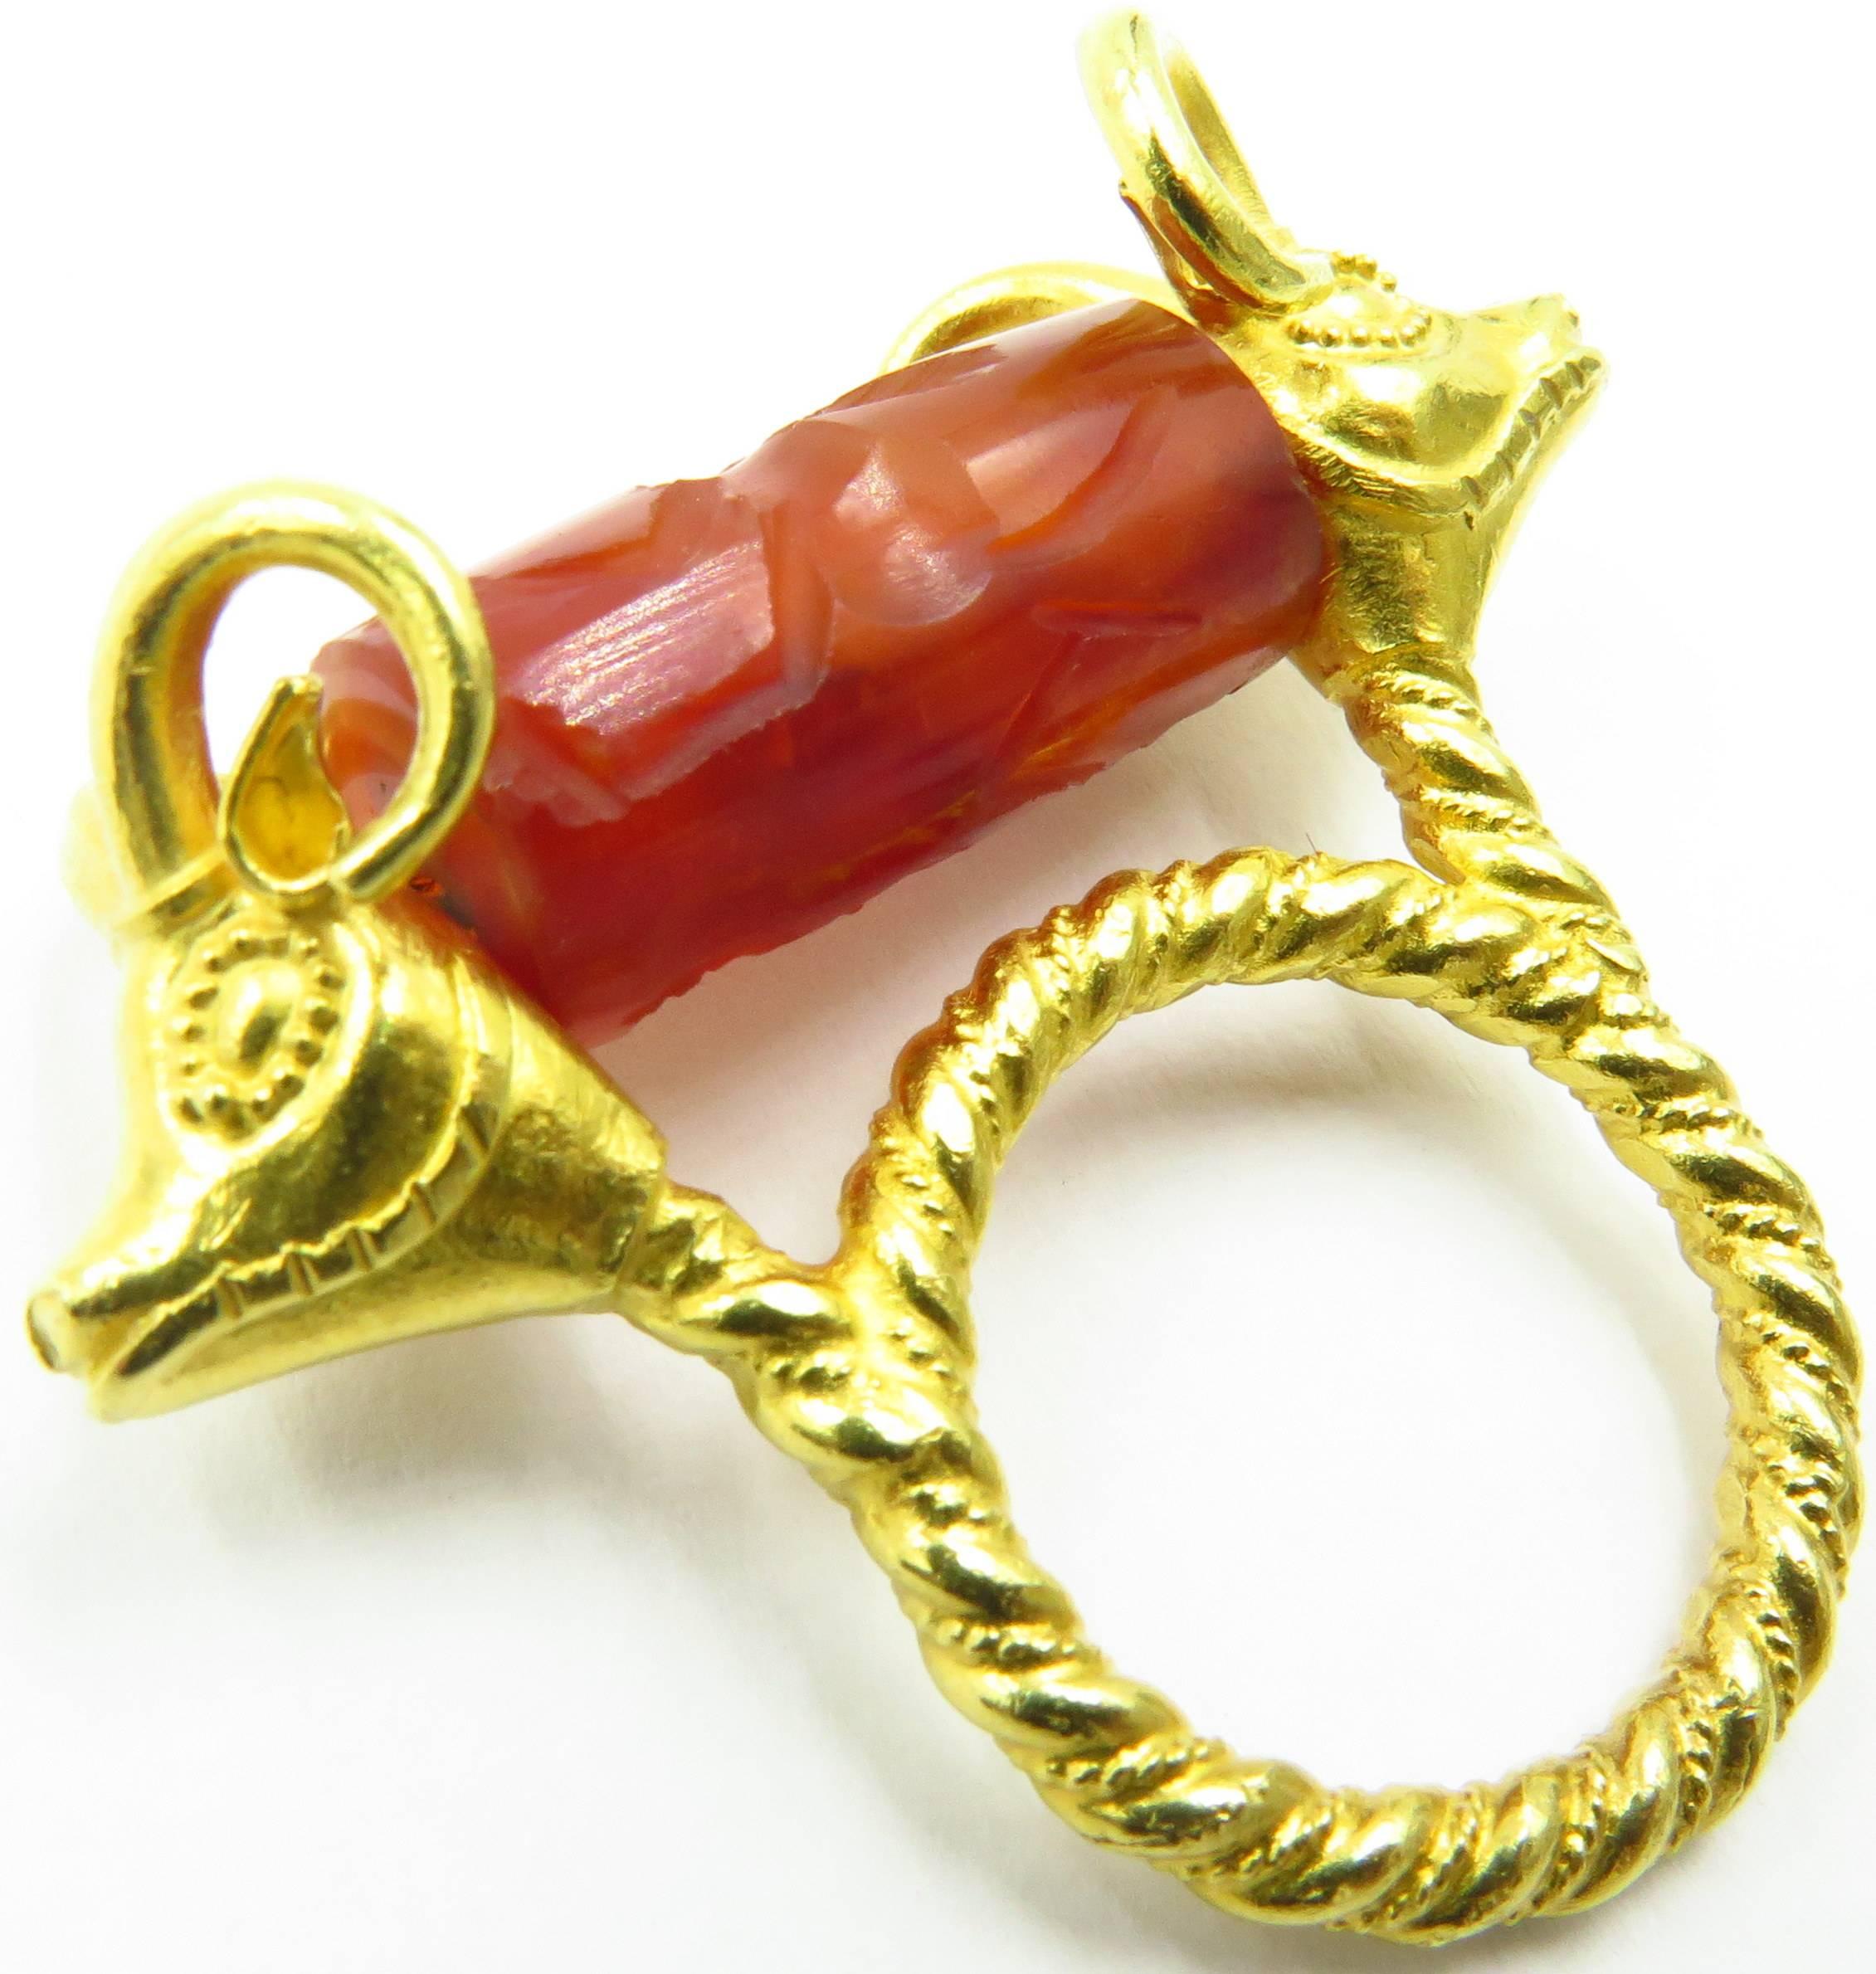 This marvelous ring is perfect in so many ways. It's high 22k gold, The carved carnelian stone that spins (I love this to give me something to do when I'm feeling nervous). The Etruscan work on the Rams! And it's very comfortable to wear. It's just